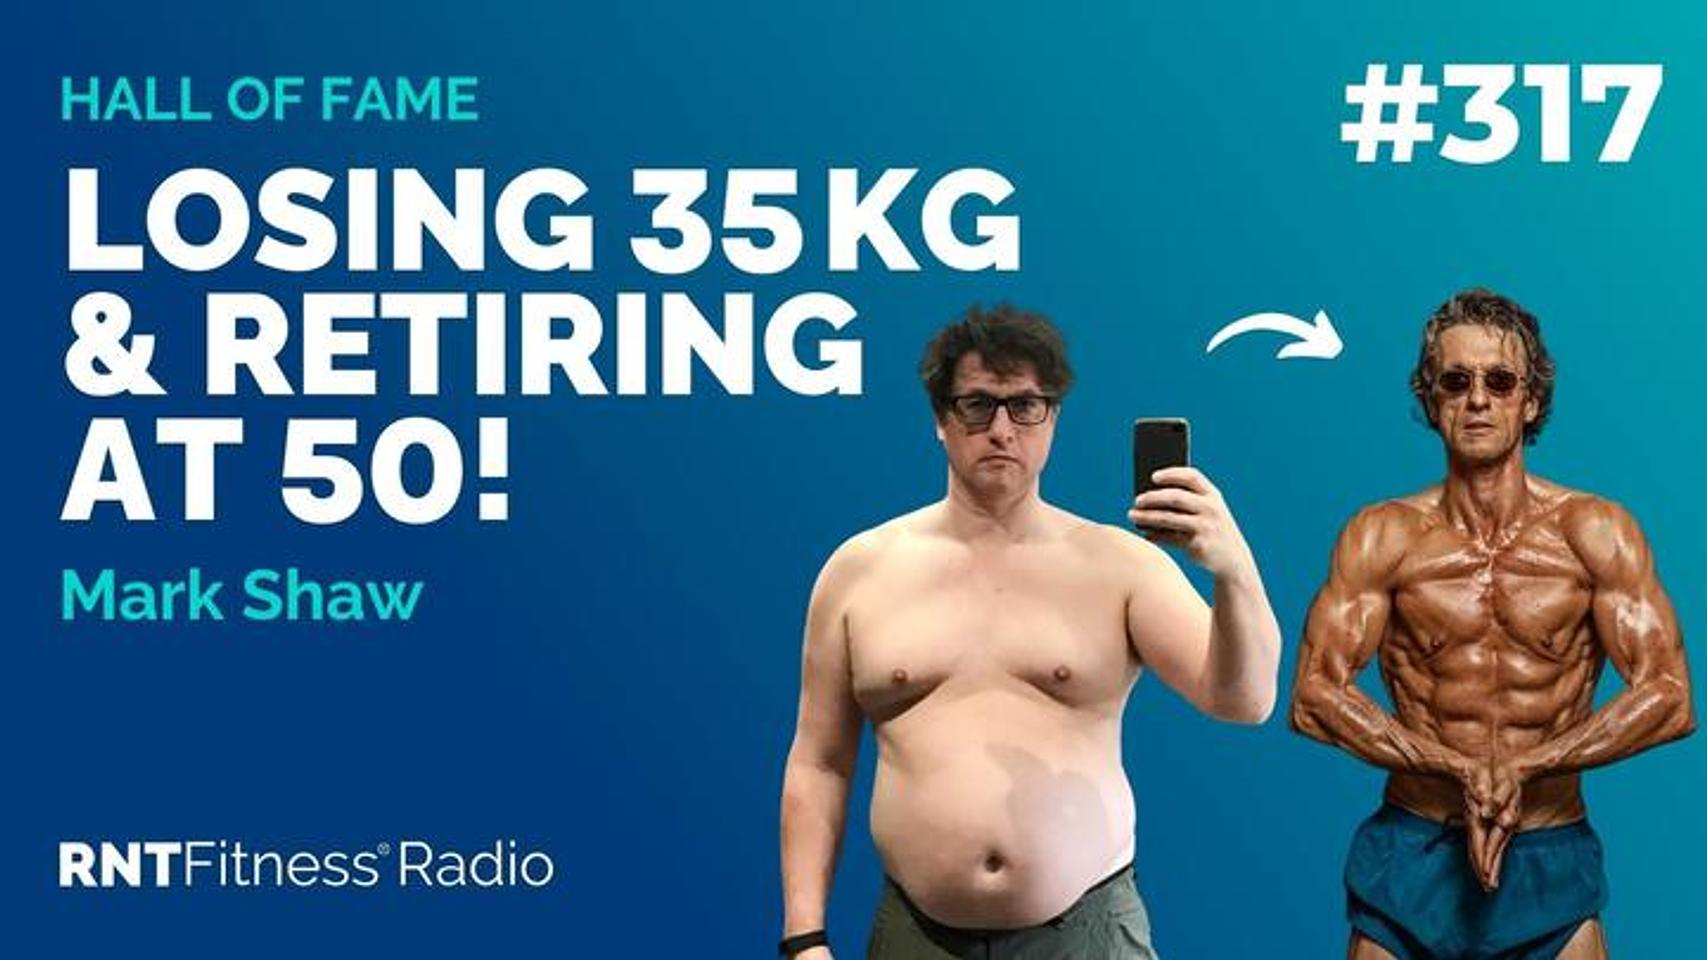 Ep 317 - Hall Of Fame | Mark Shaw: Losing 35kg & RETIRING At 50!